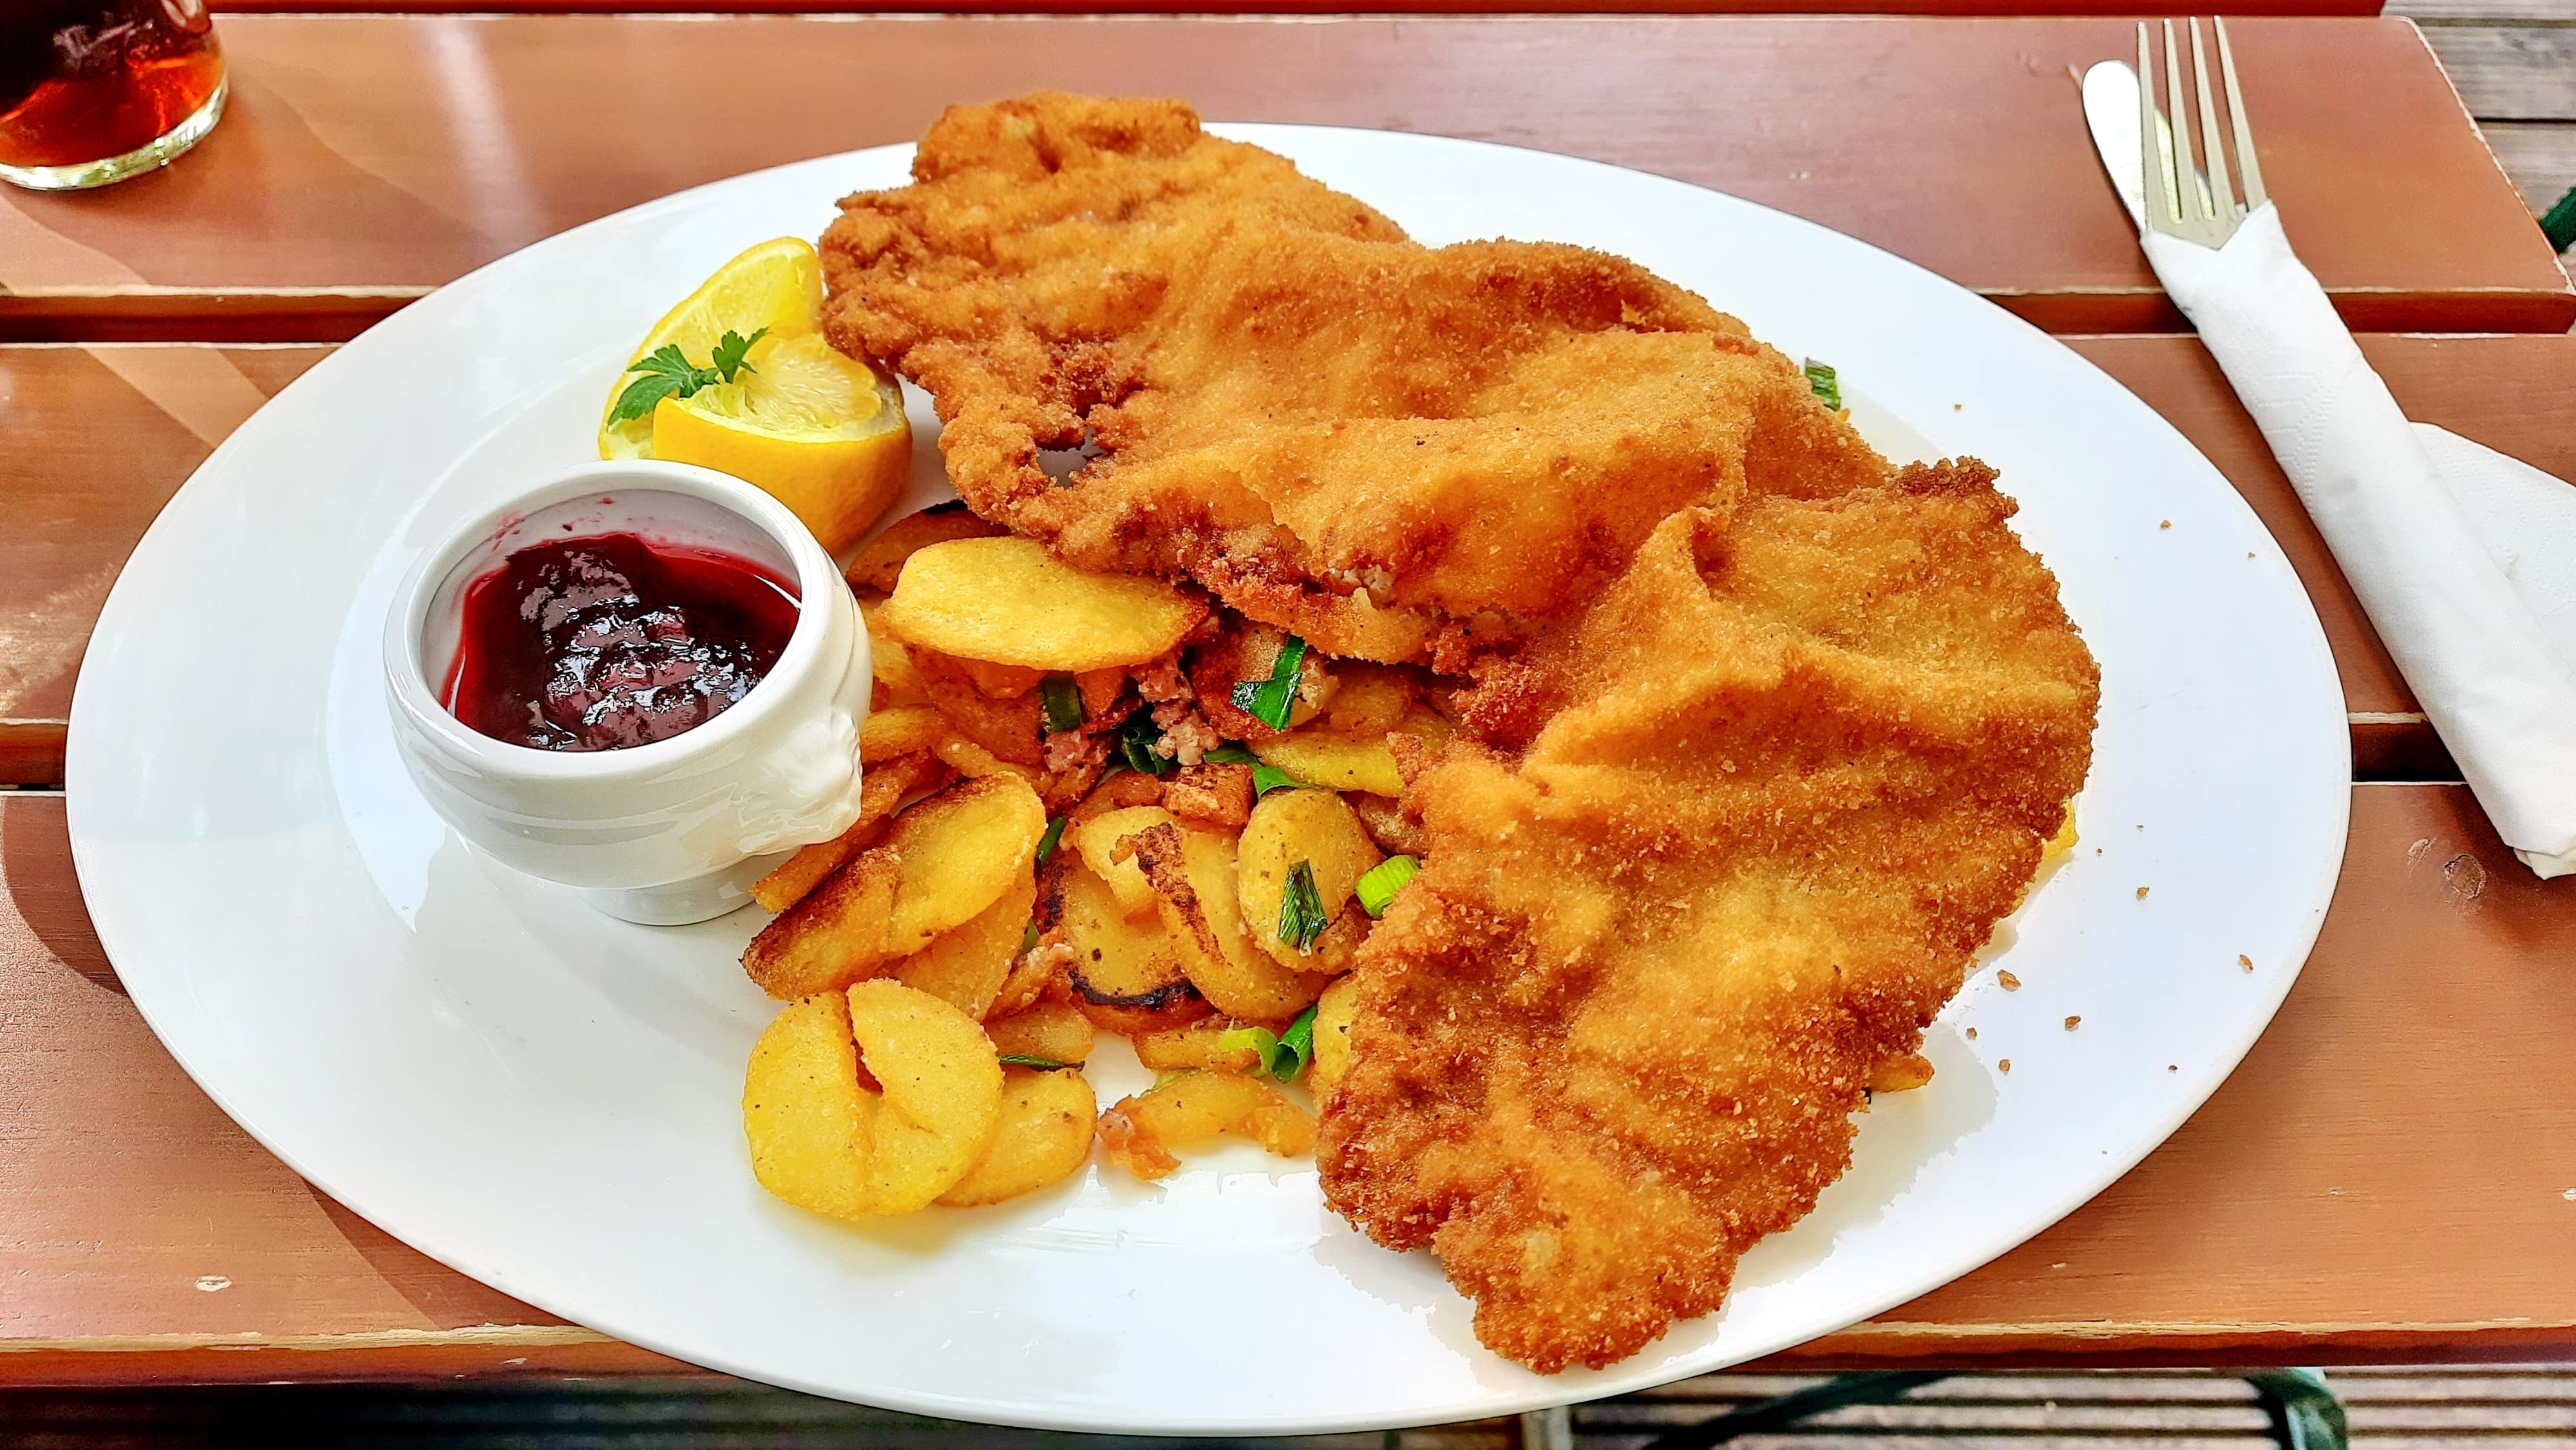 Schnitzel with pommes on a plate.